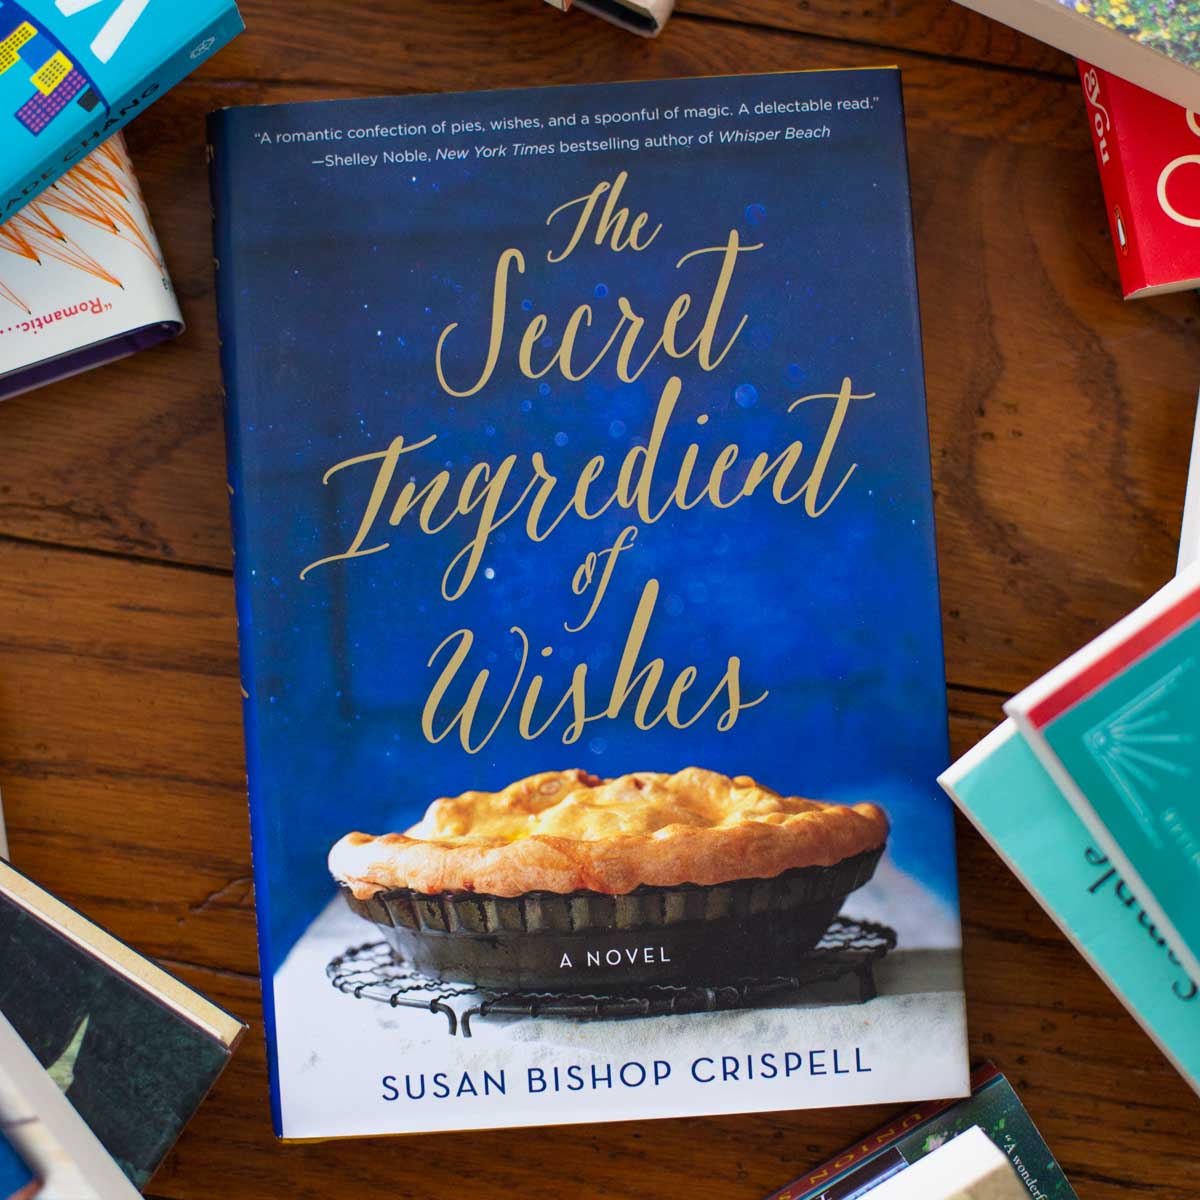 A copy of the book The Secret Ingredient of Wishes sits on a table.